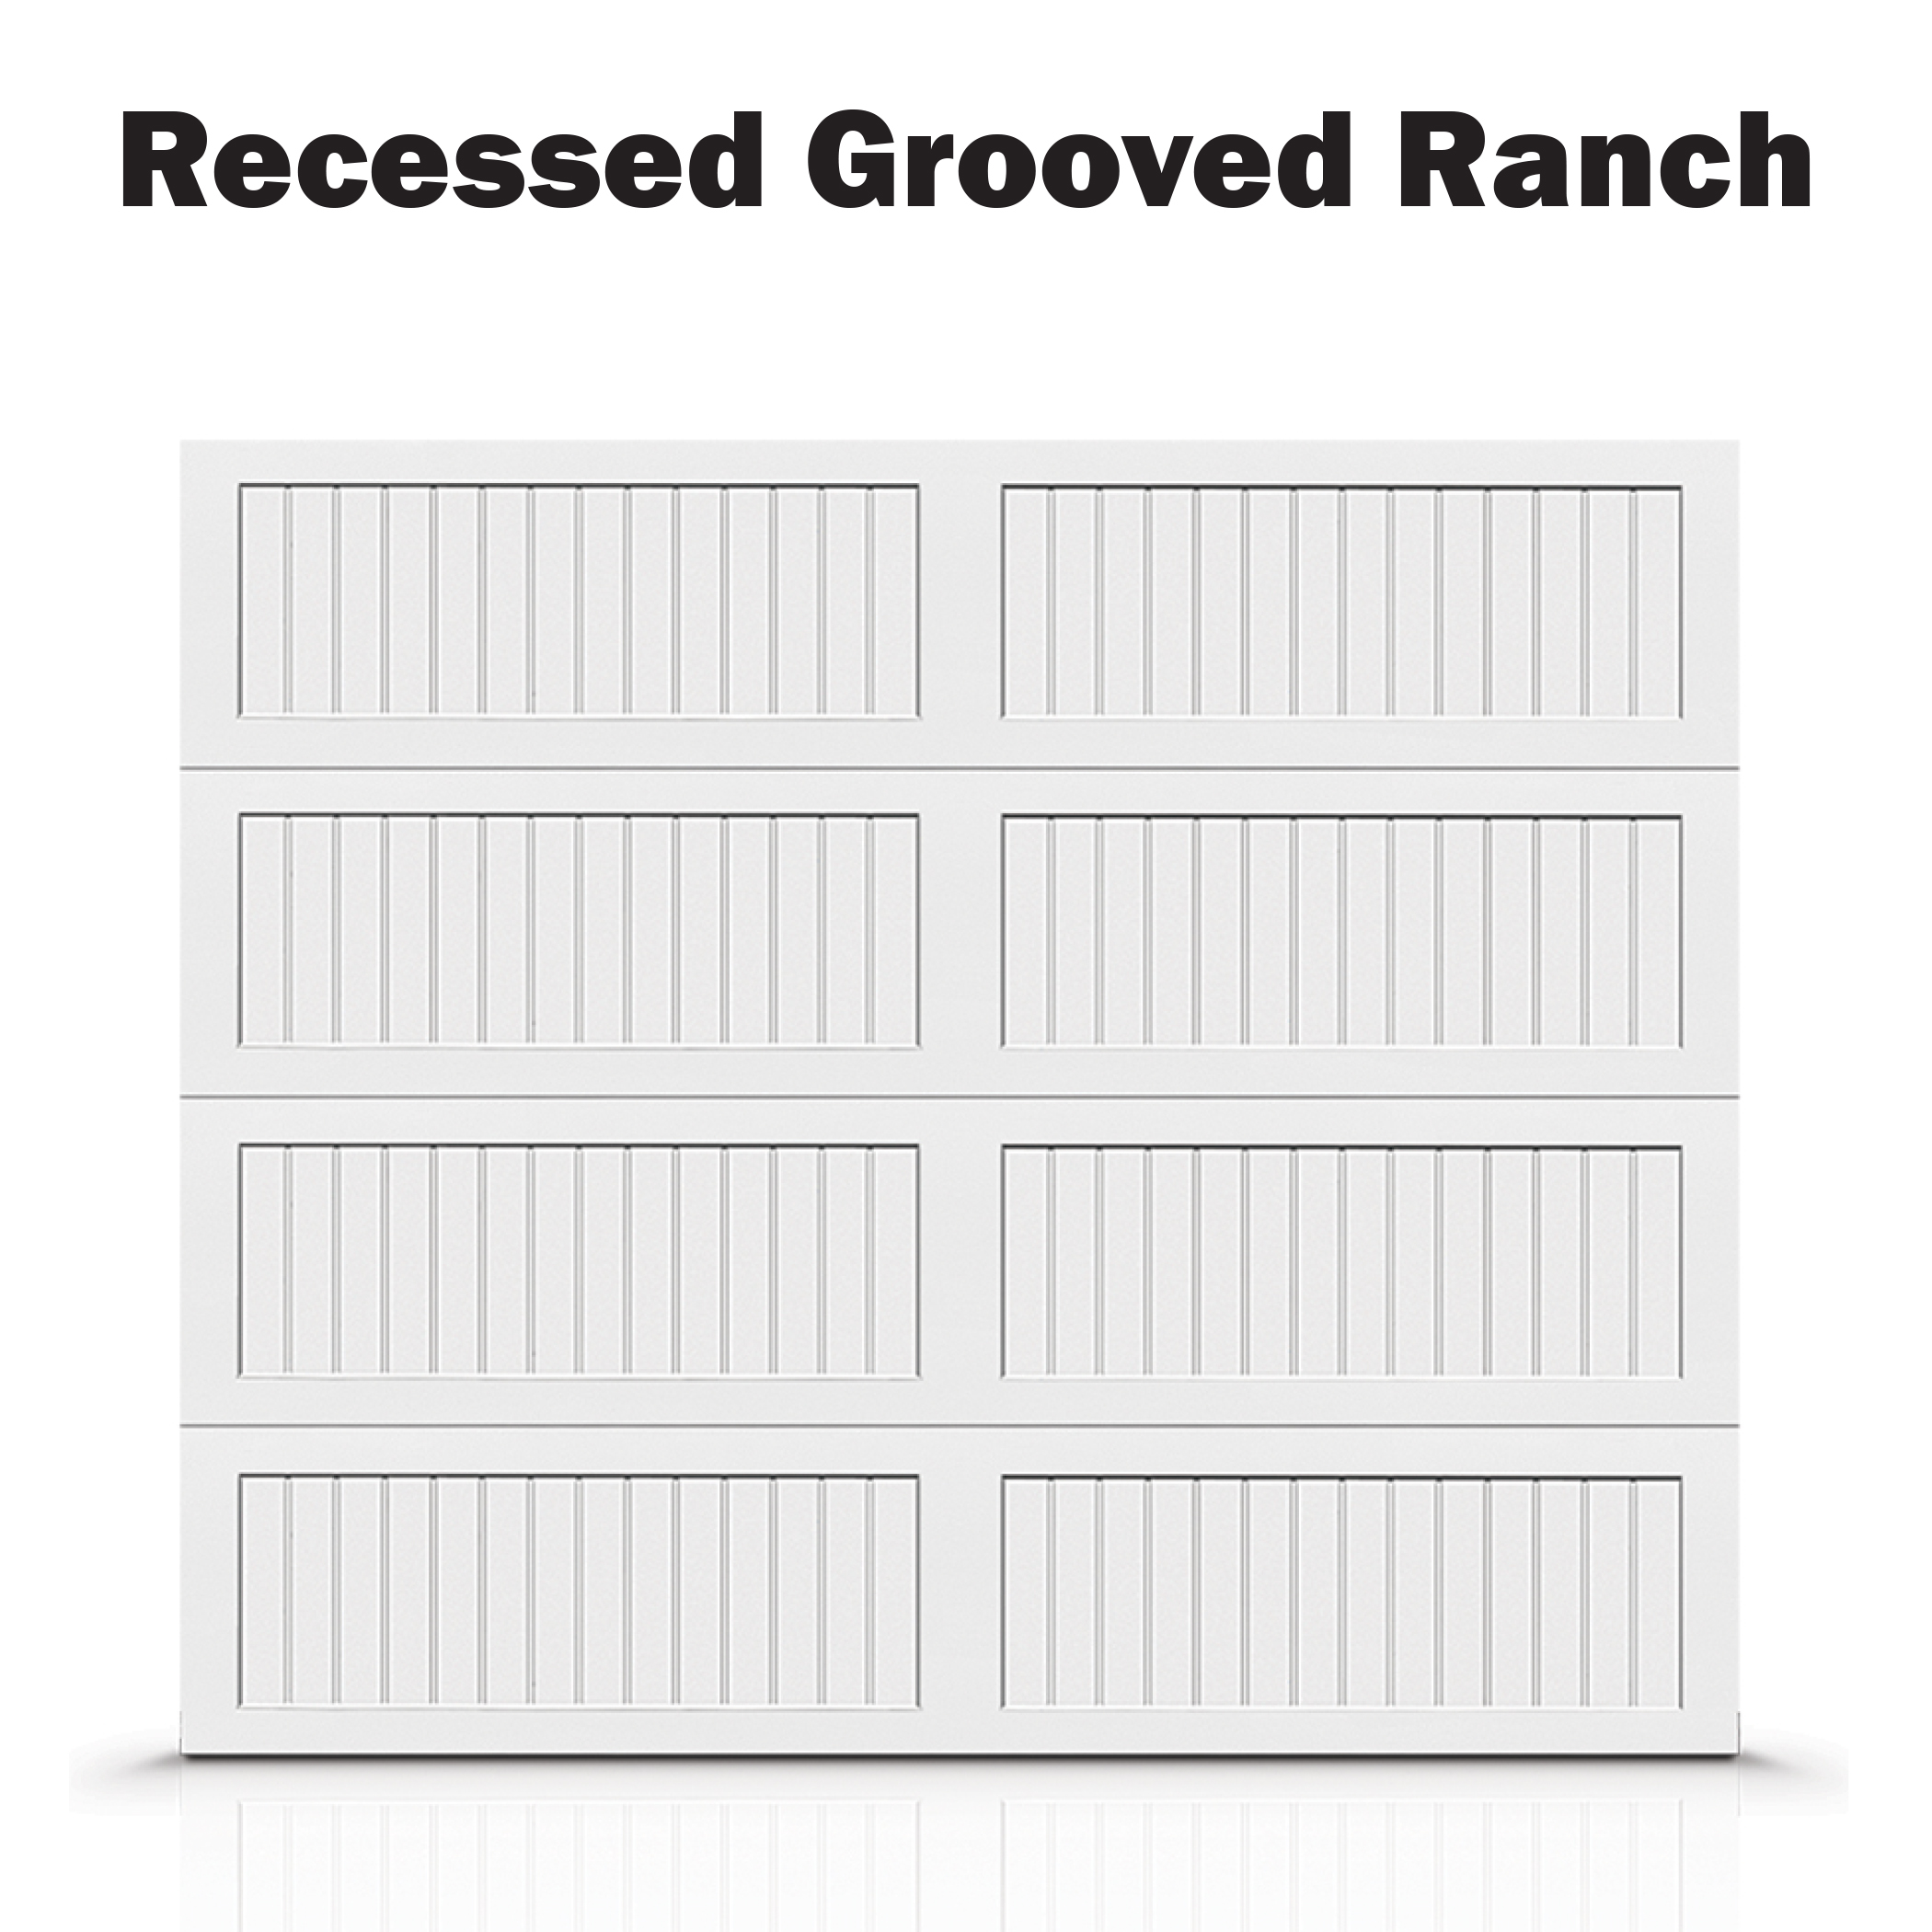 Recessed Grooved Ranch - Classic.jpg